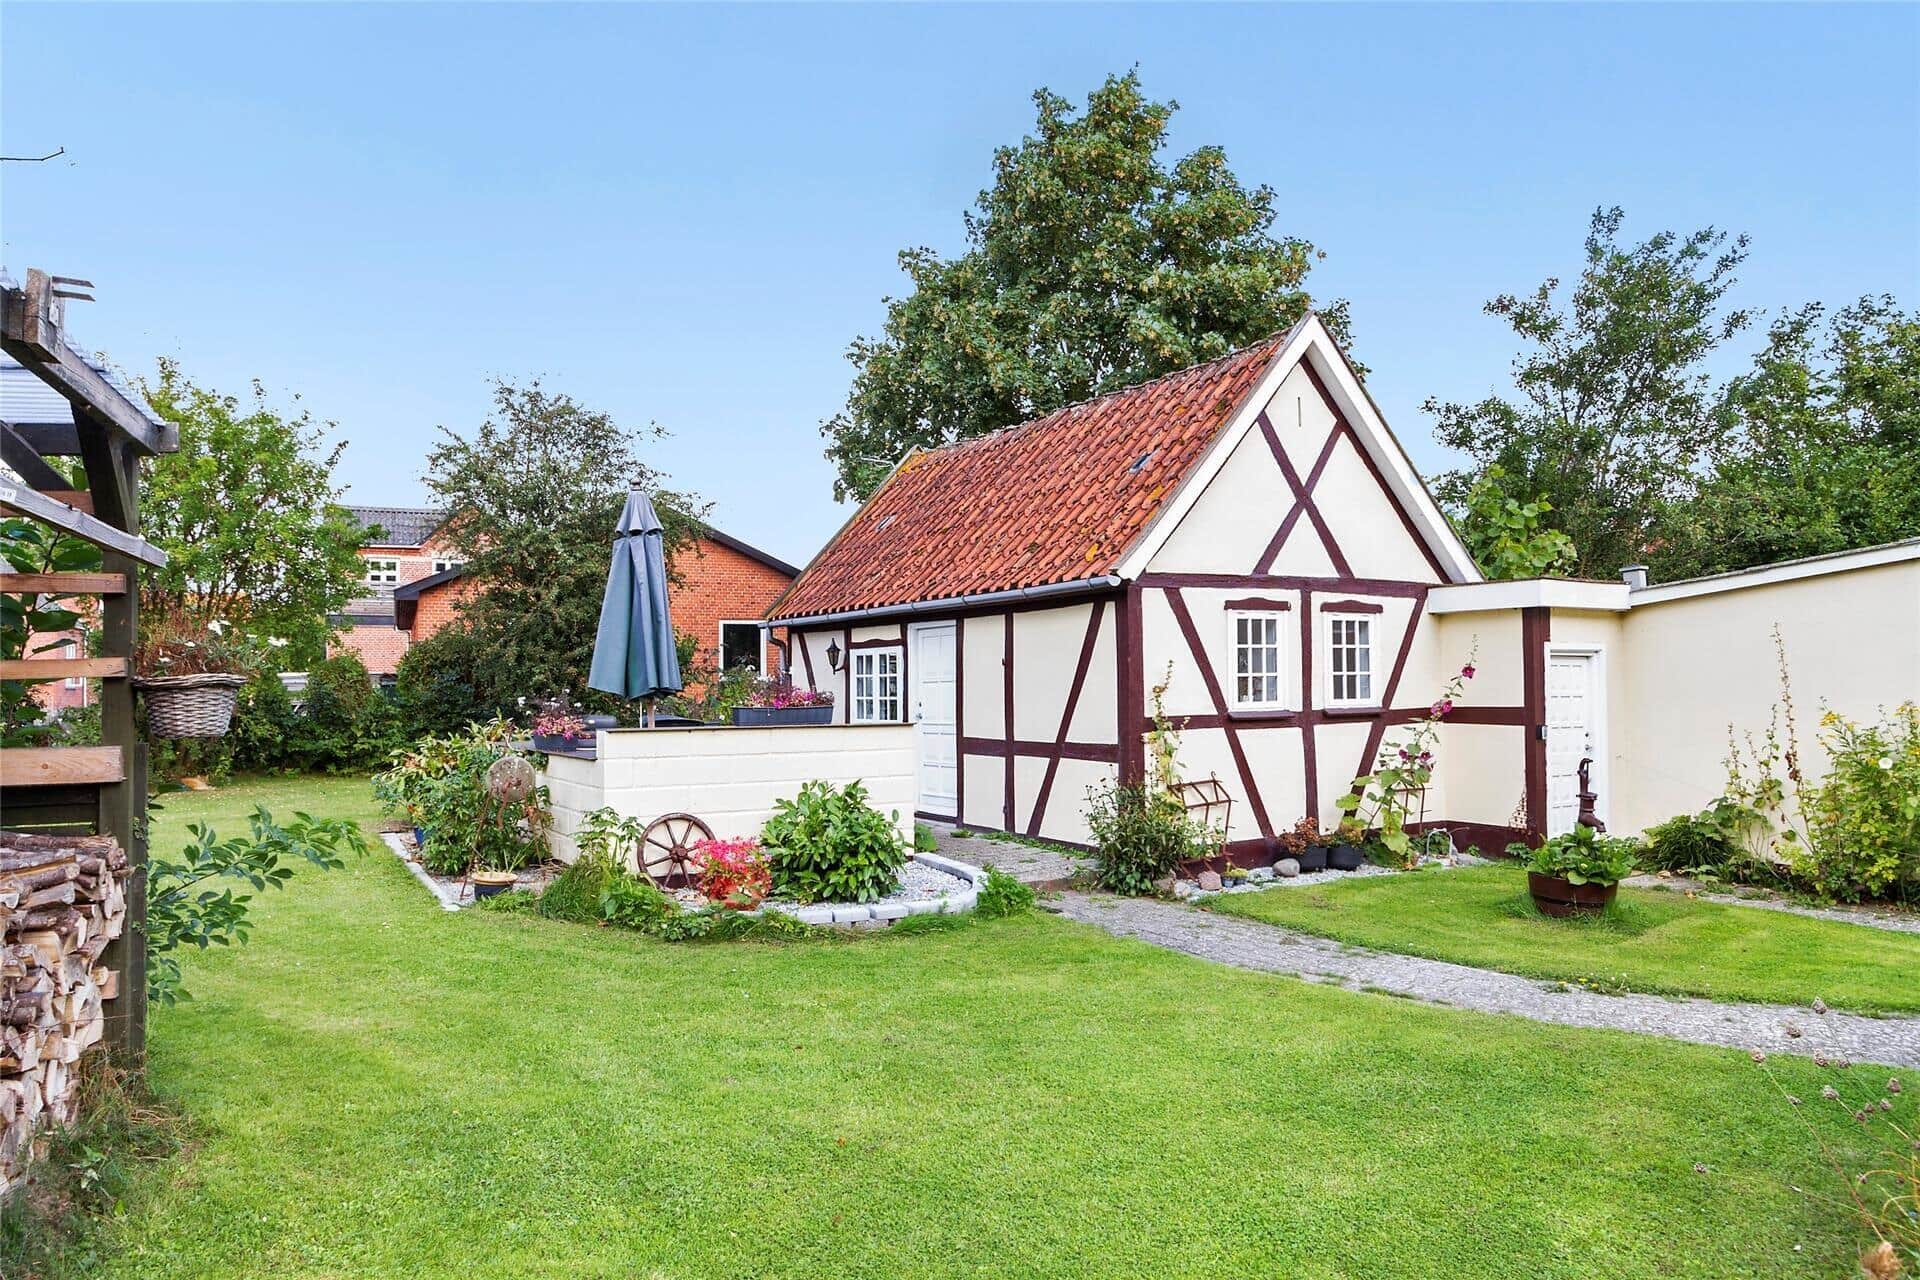 Image 3-15 Holiday-home FA008, Hovedgaden 27, DK - 4654 Faxe Ladeplads